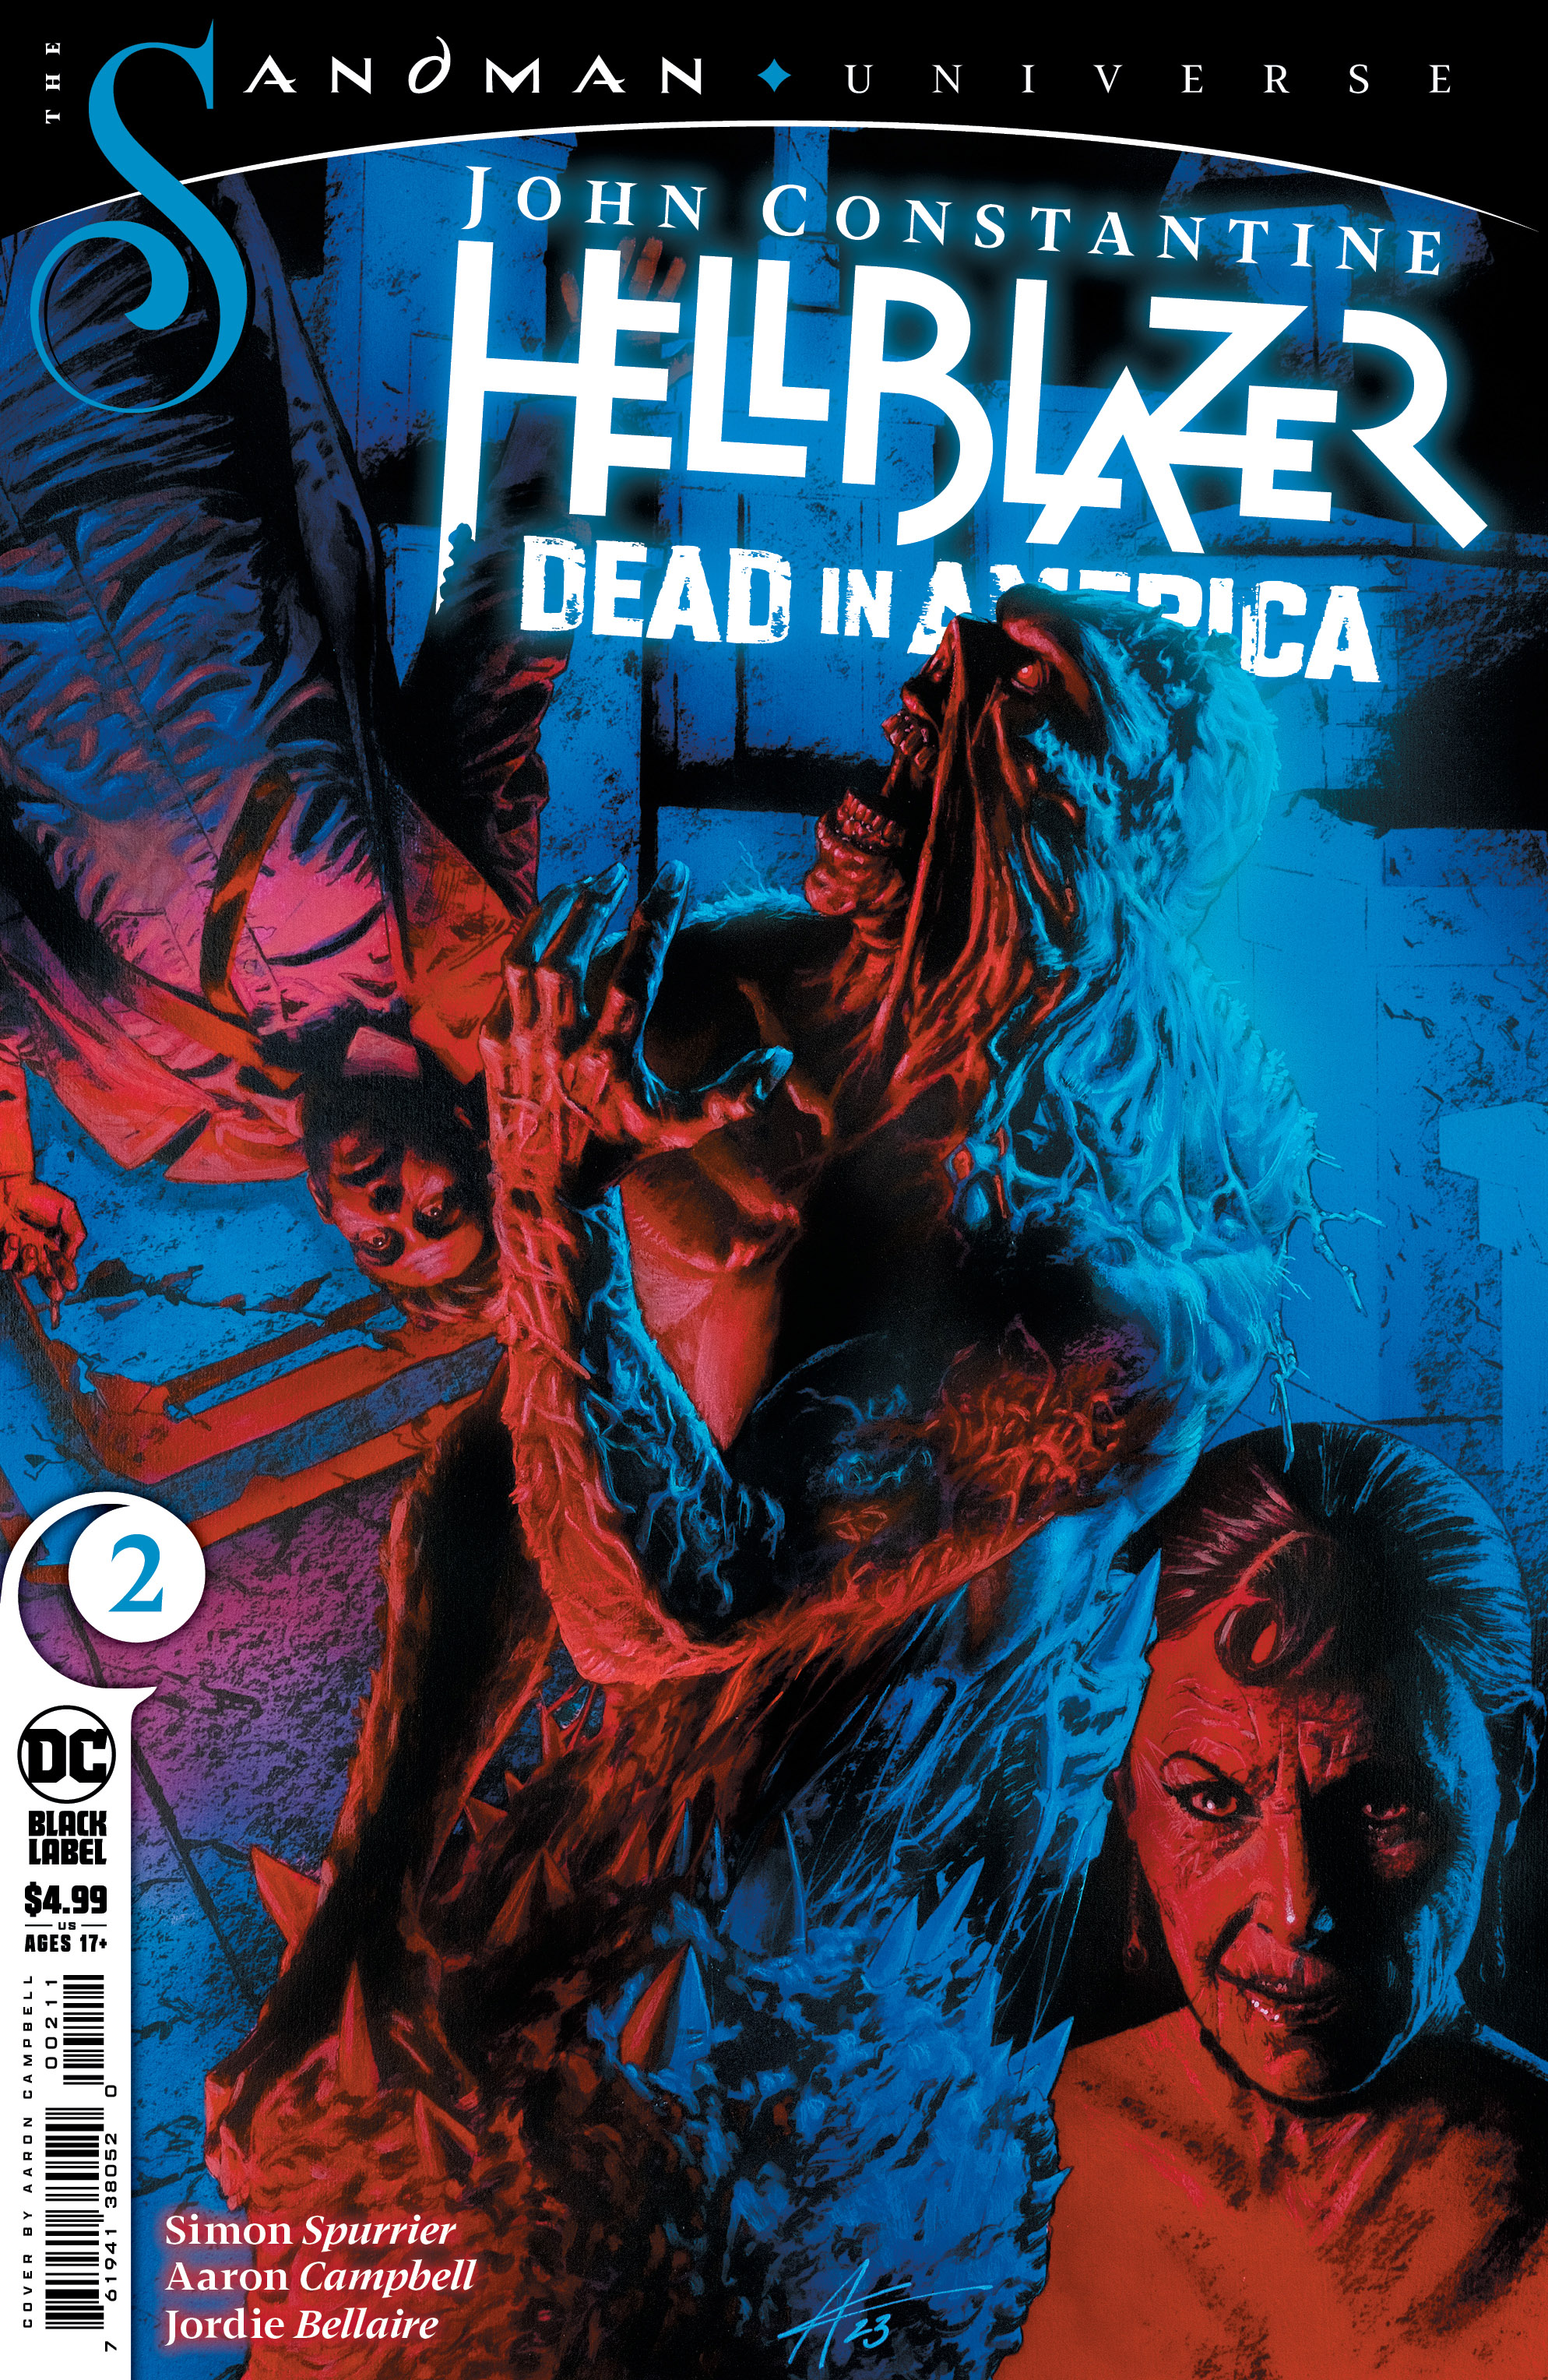 John Constantine, Hellblazer Dead in America #2 Cover A Aaron Campbell (Mature) (Of 8)